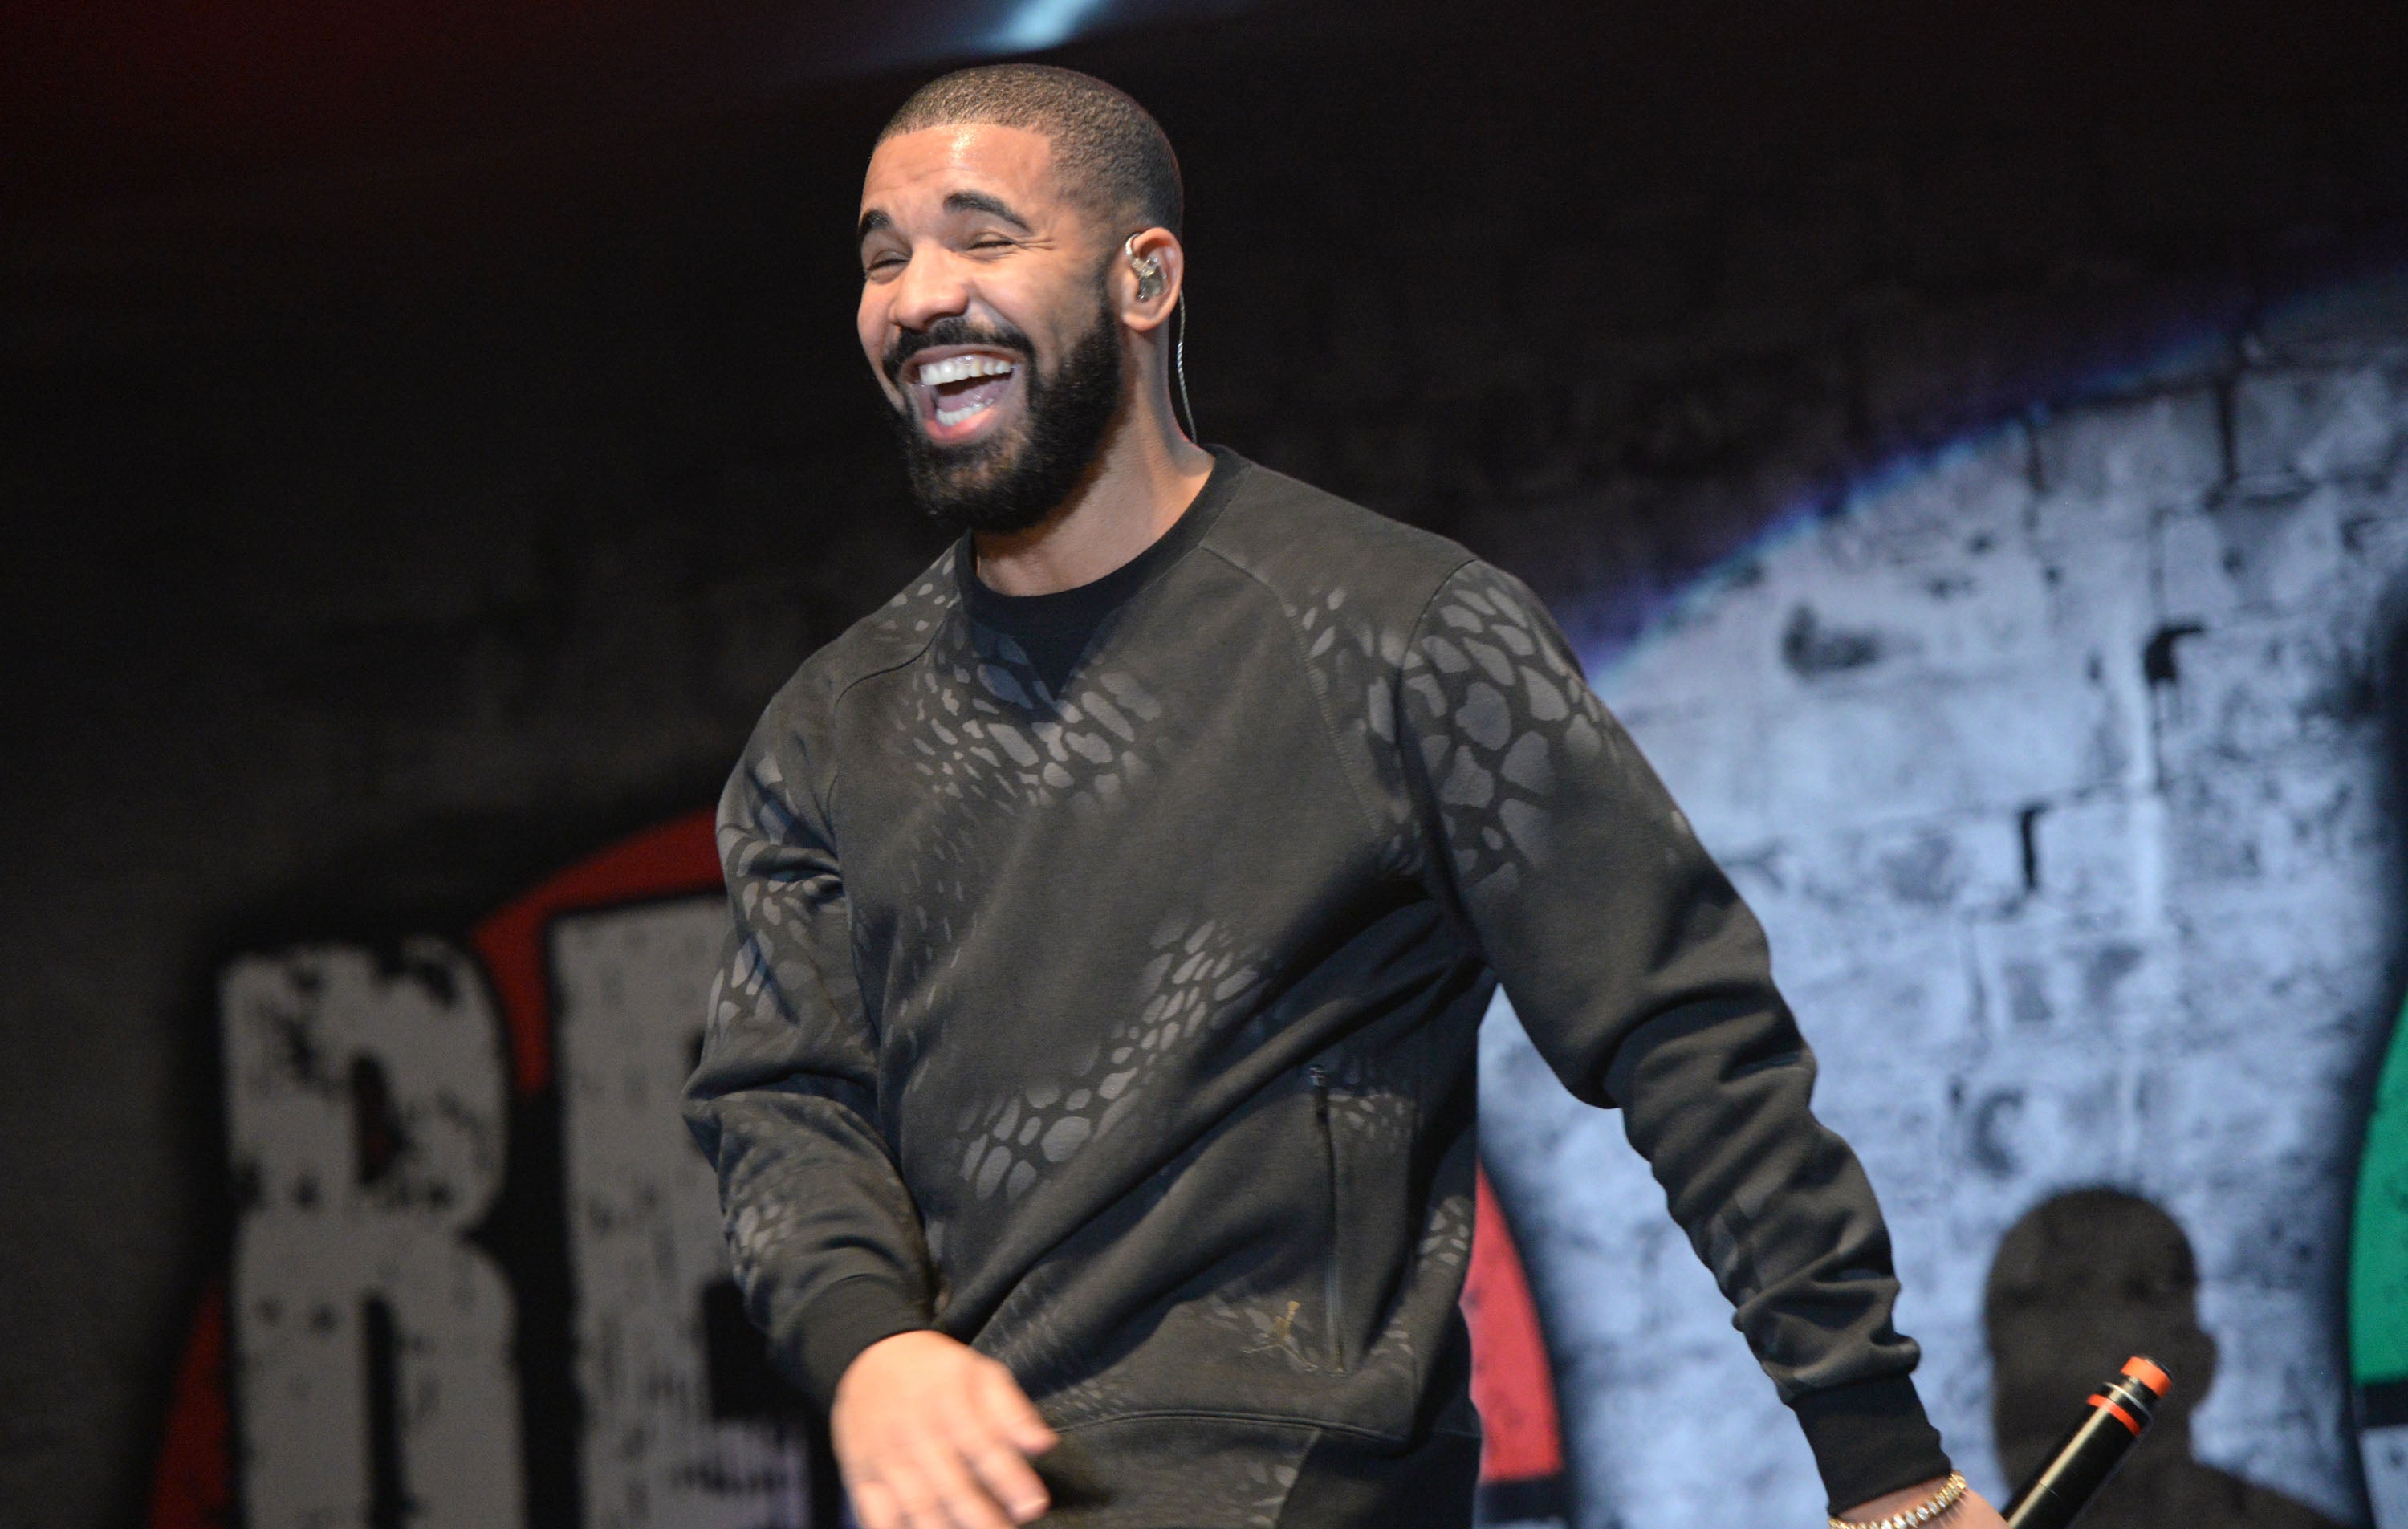 Drake Drops Two New Singles, "Pop Style" and "One Dance"
